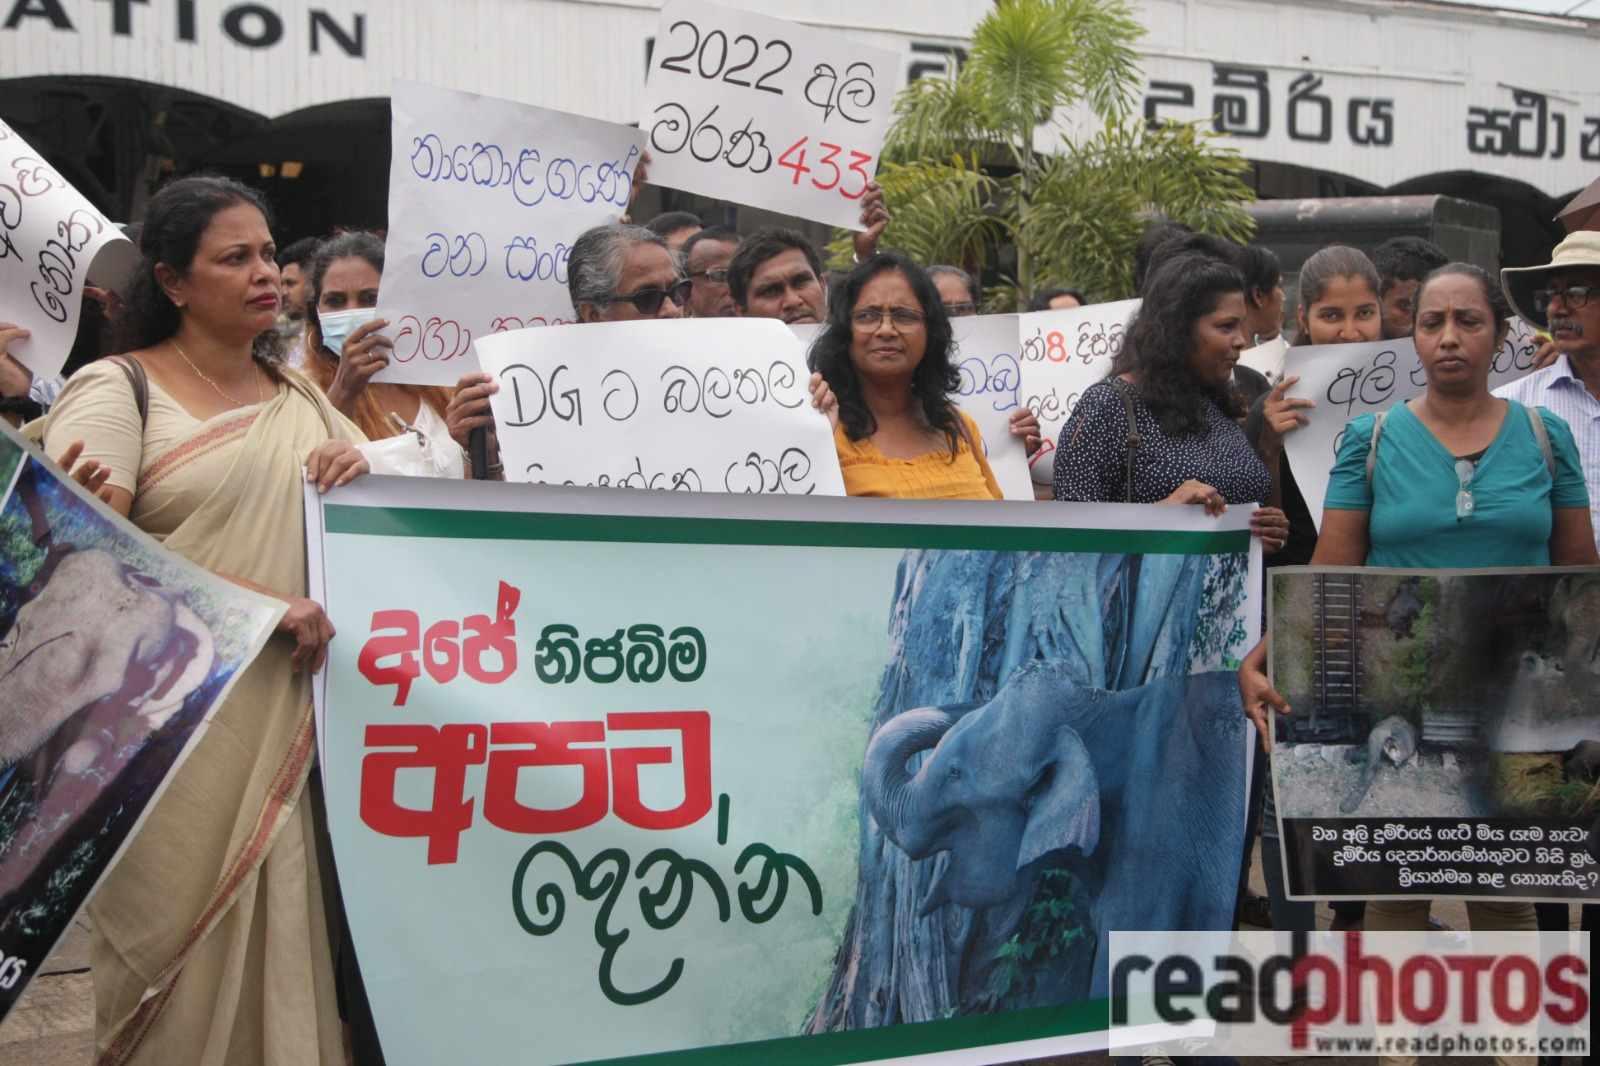 Protesters demand justice for elephants